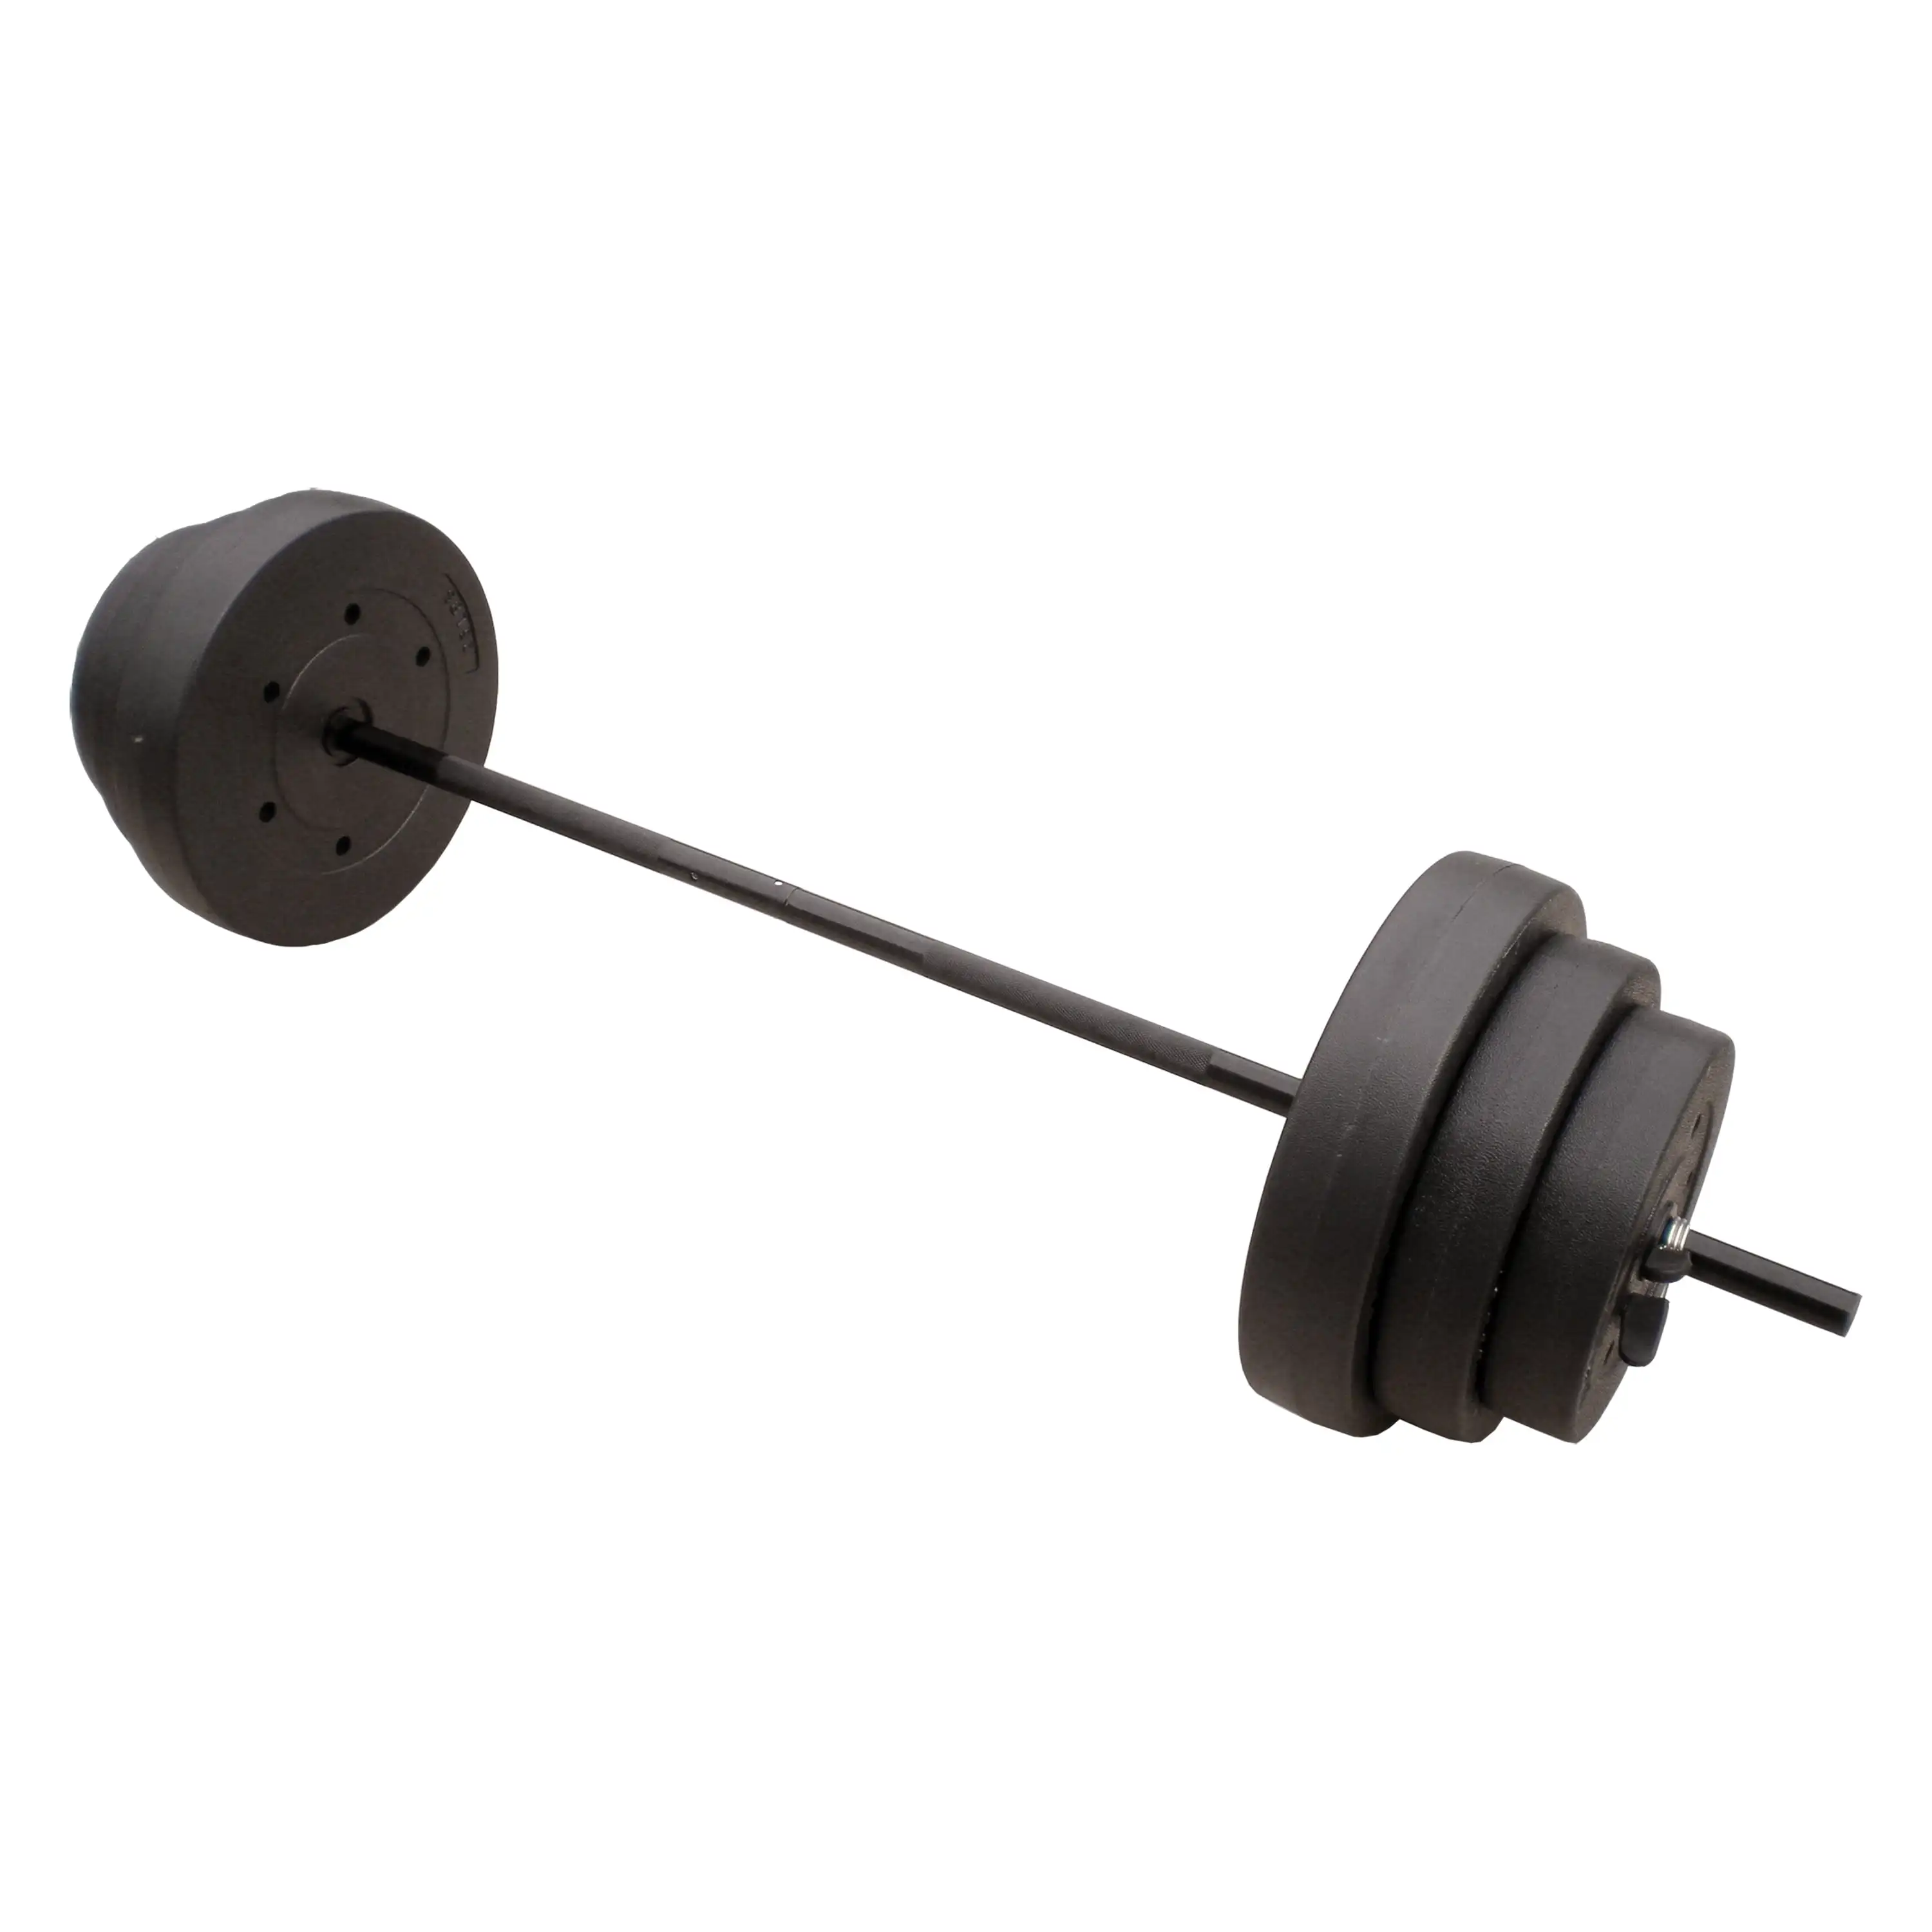 Barbell 100 lb Vinyl Weight Set with bar